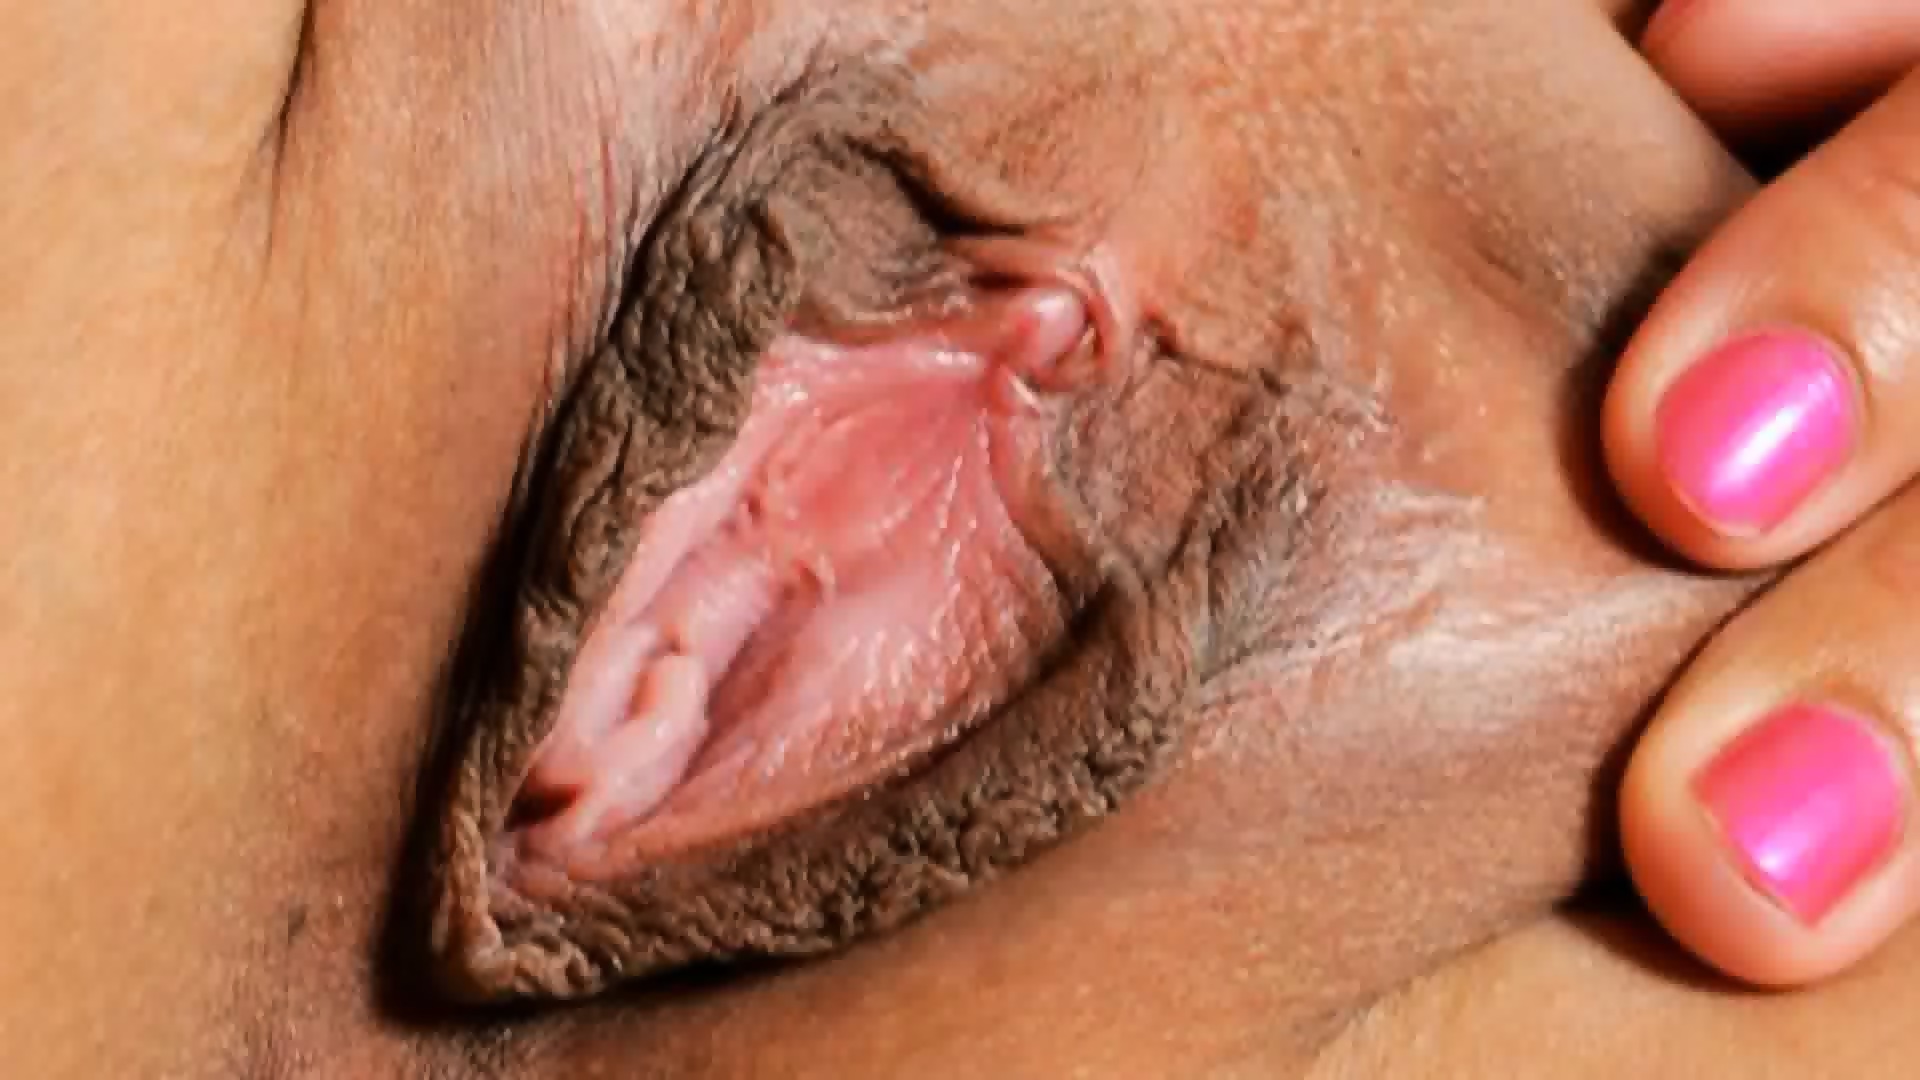 Female Textures Push My Pink Button Hd 1080pvagina Close Up Hairy